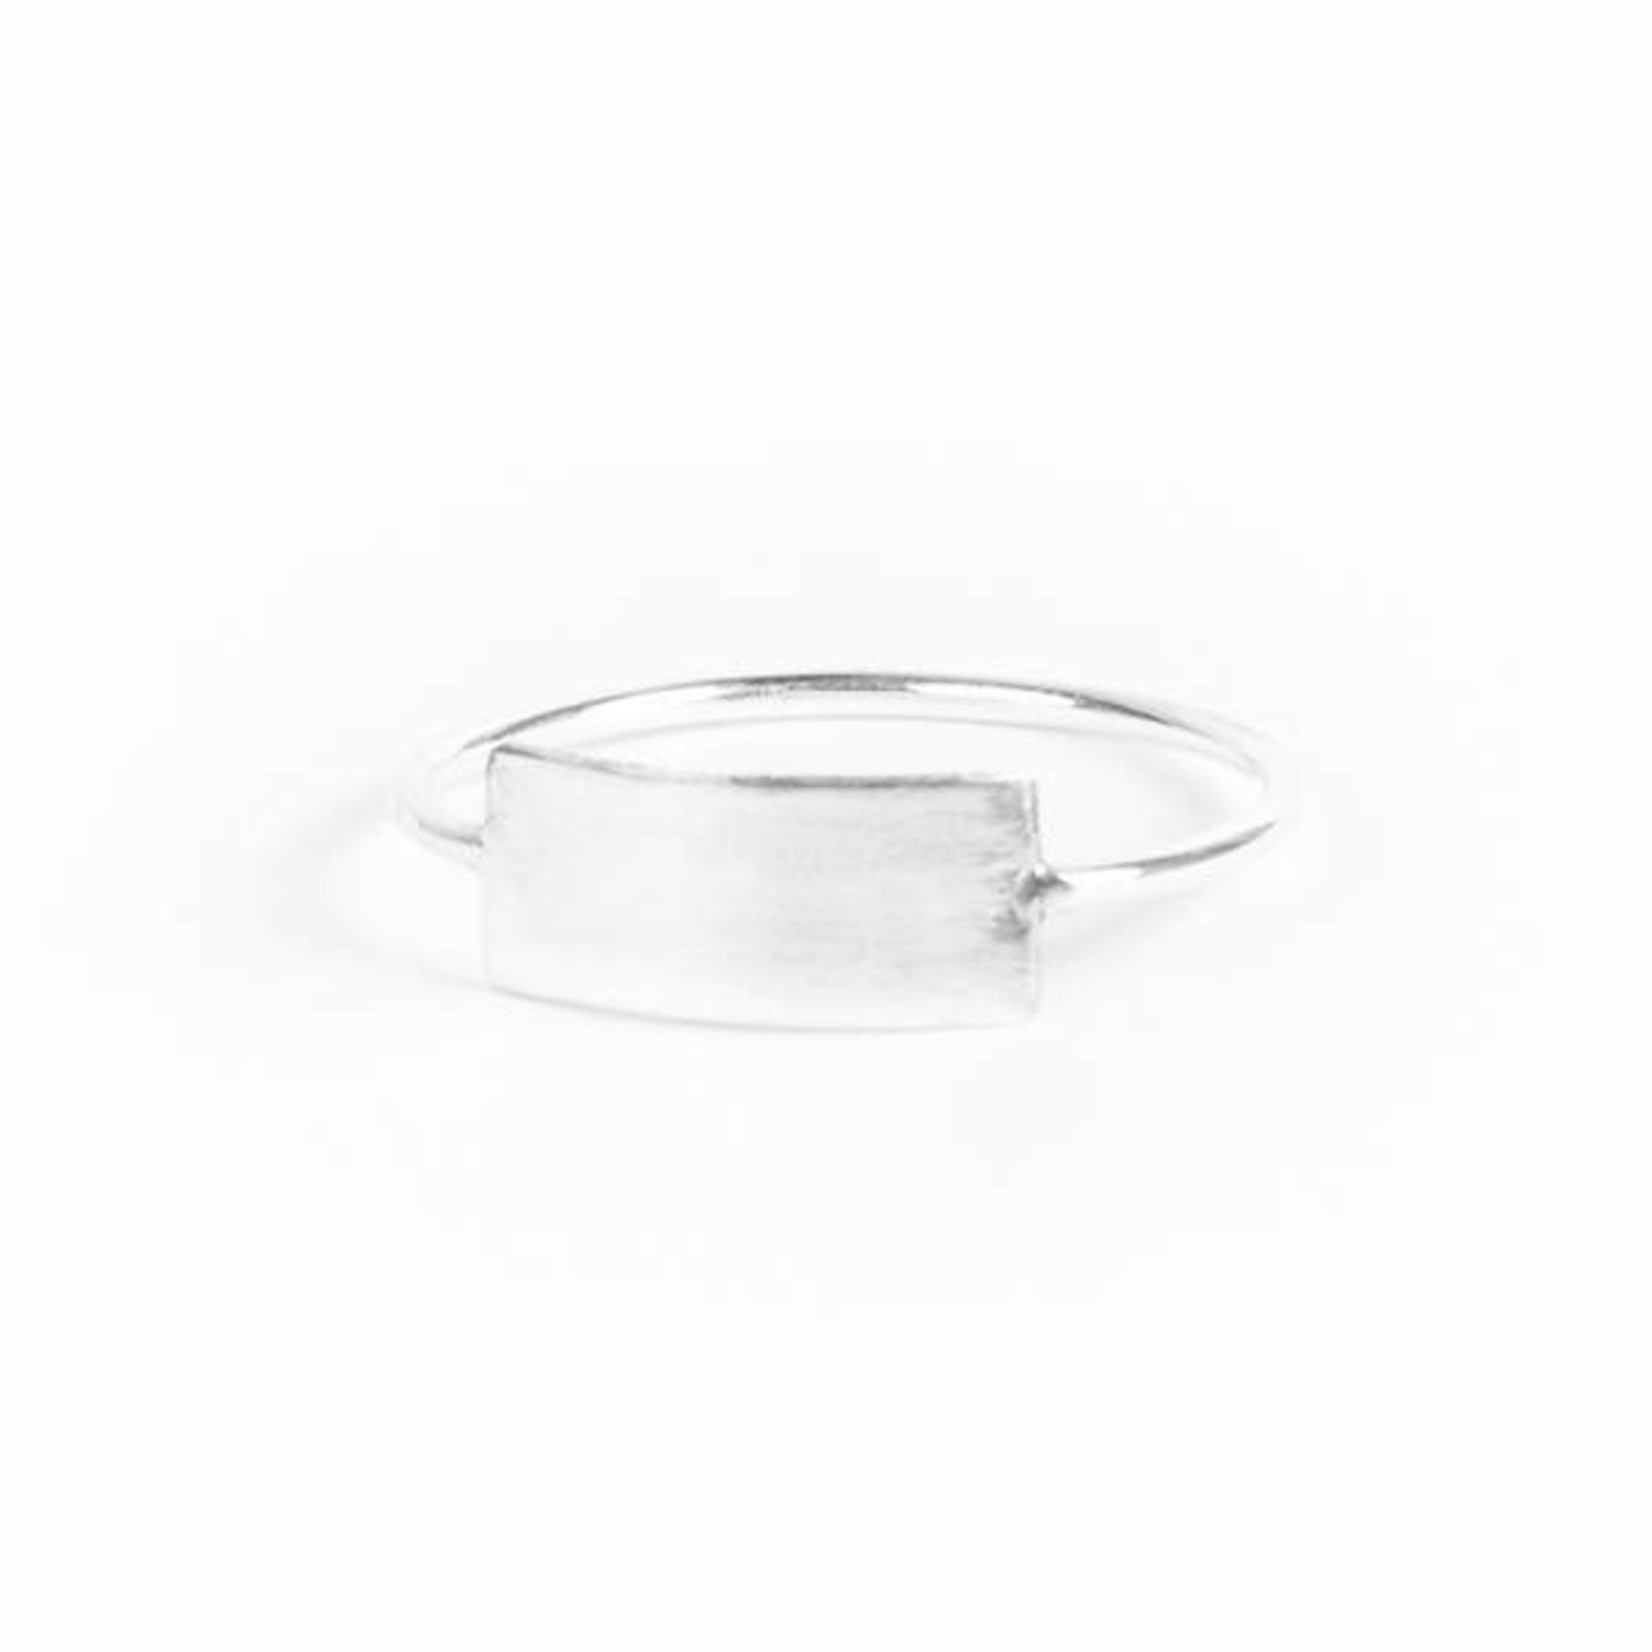 charlotte wooning ring geometry rectangle